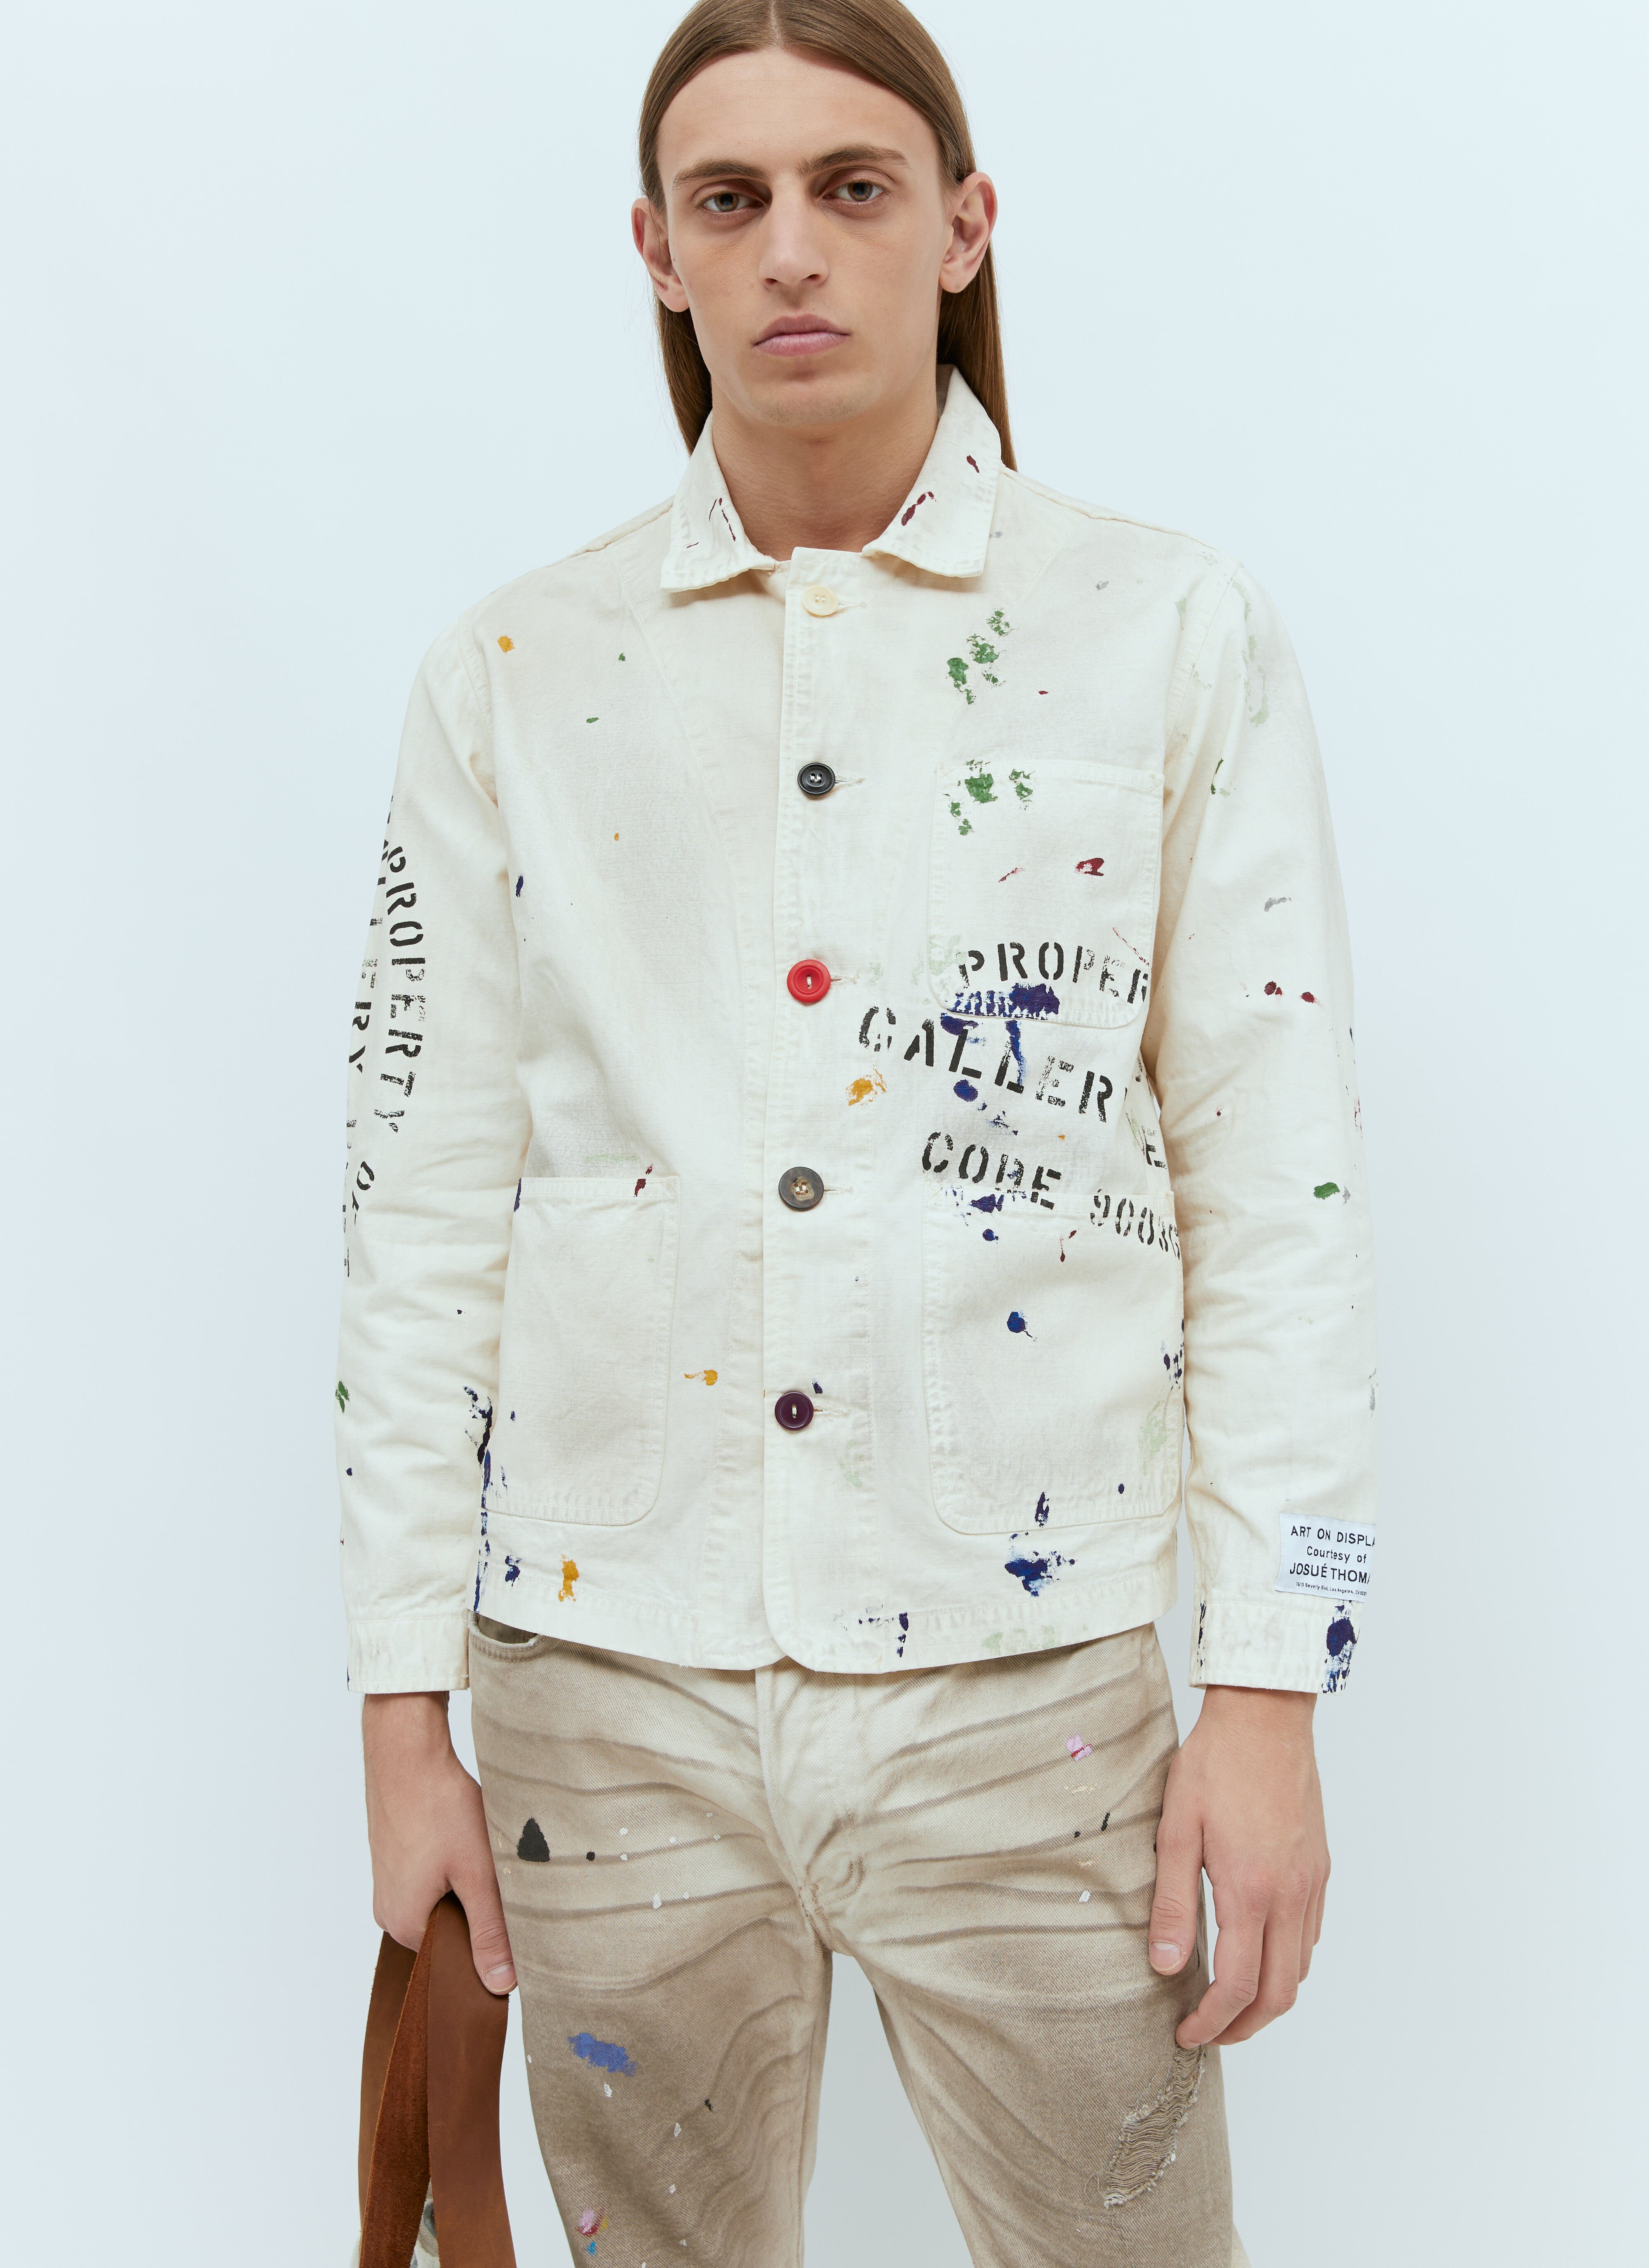 Gallery Dept. EP Jacket White gdp0153021